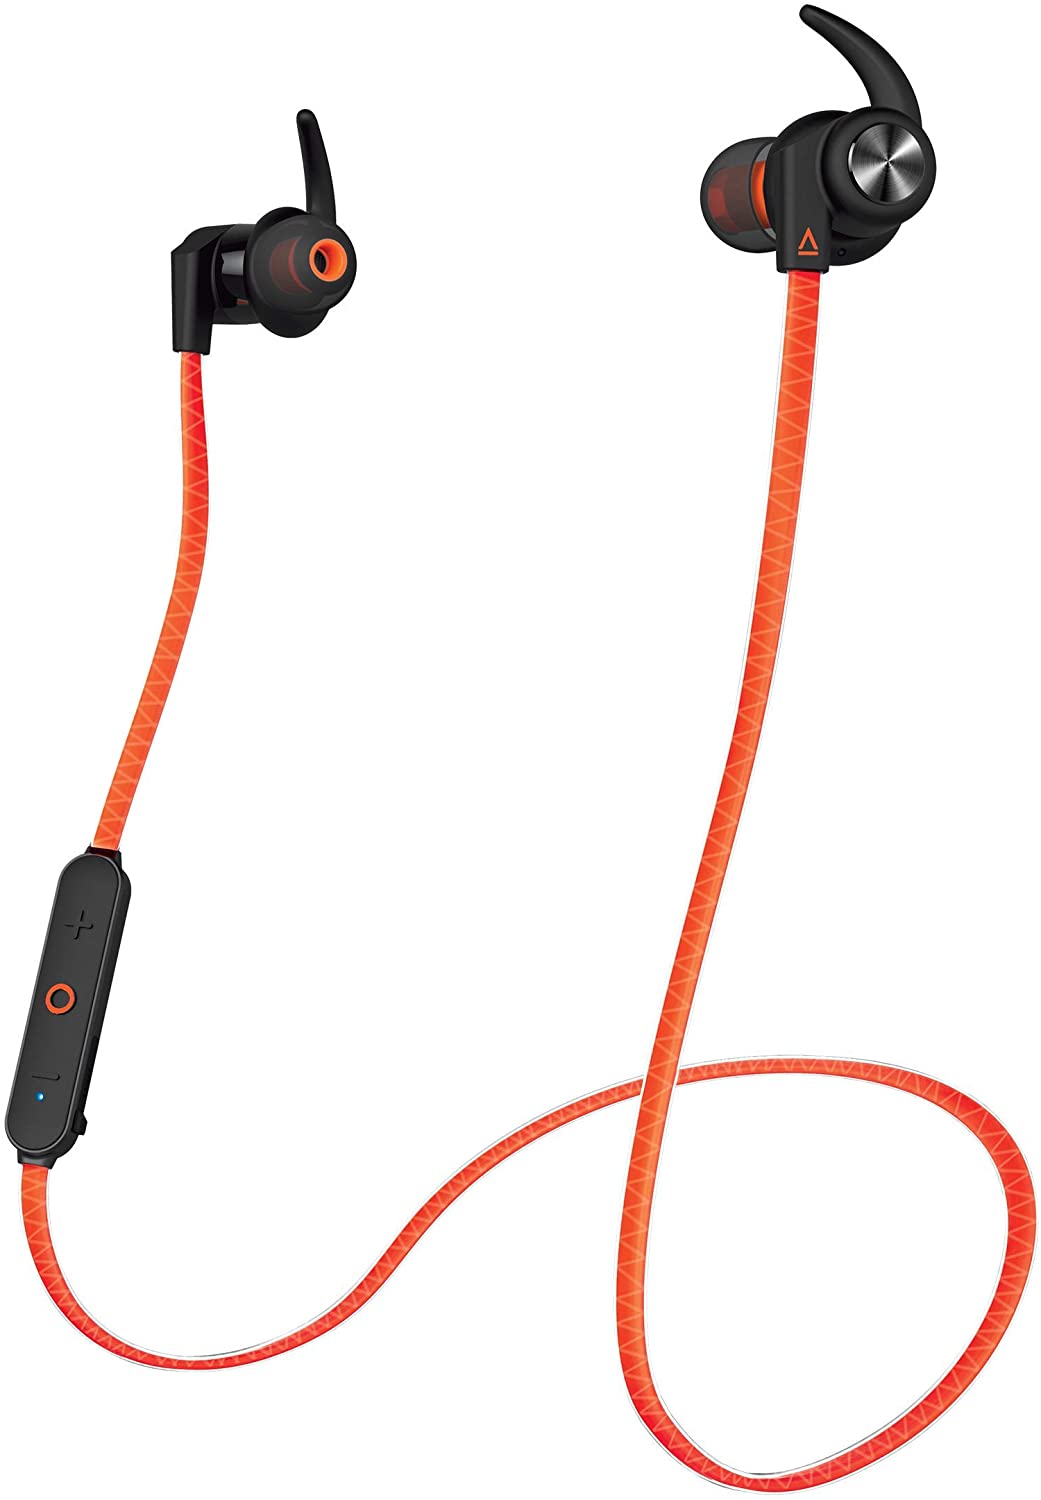 Creative Labs Headset Outlier Sports Orange